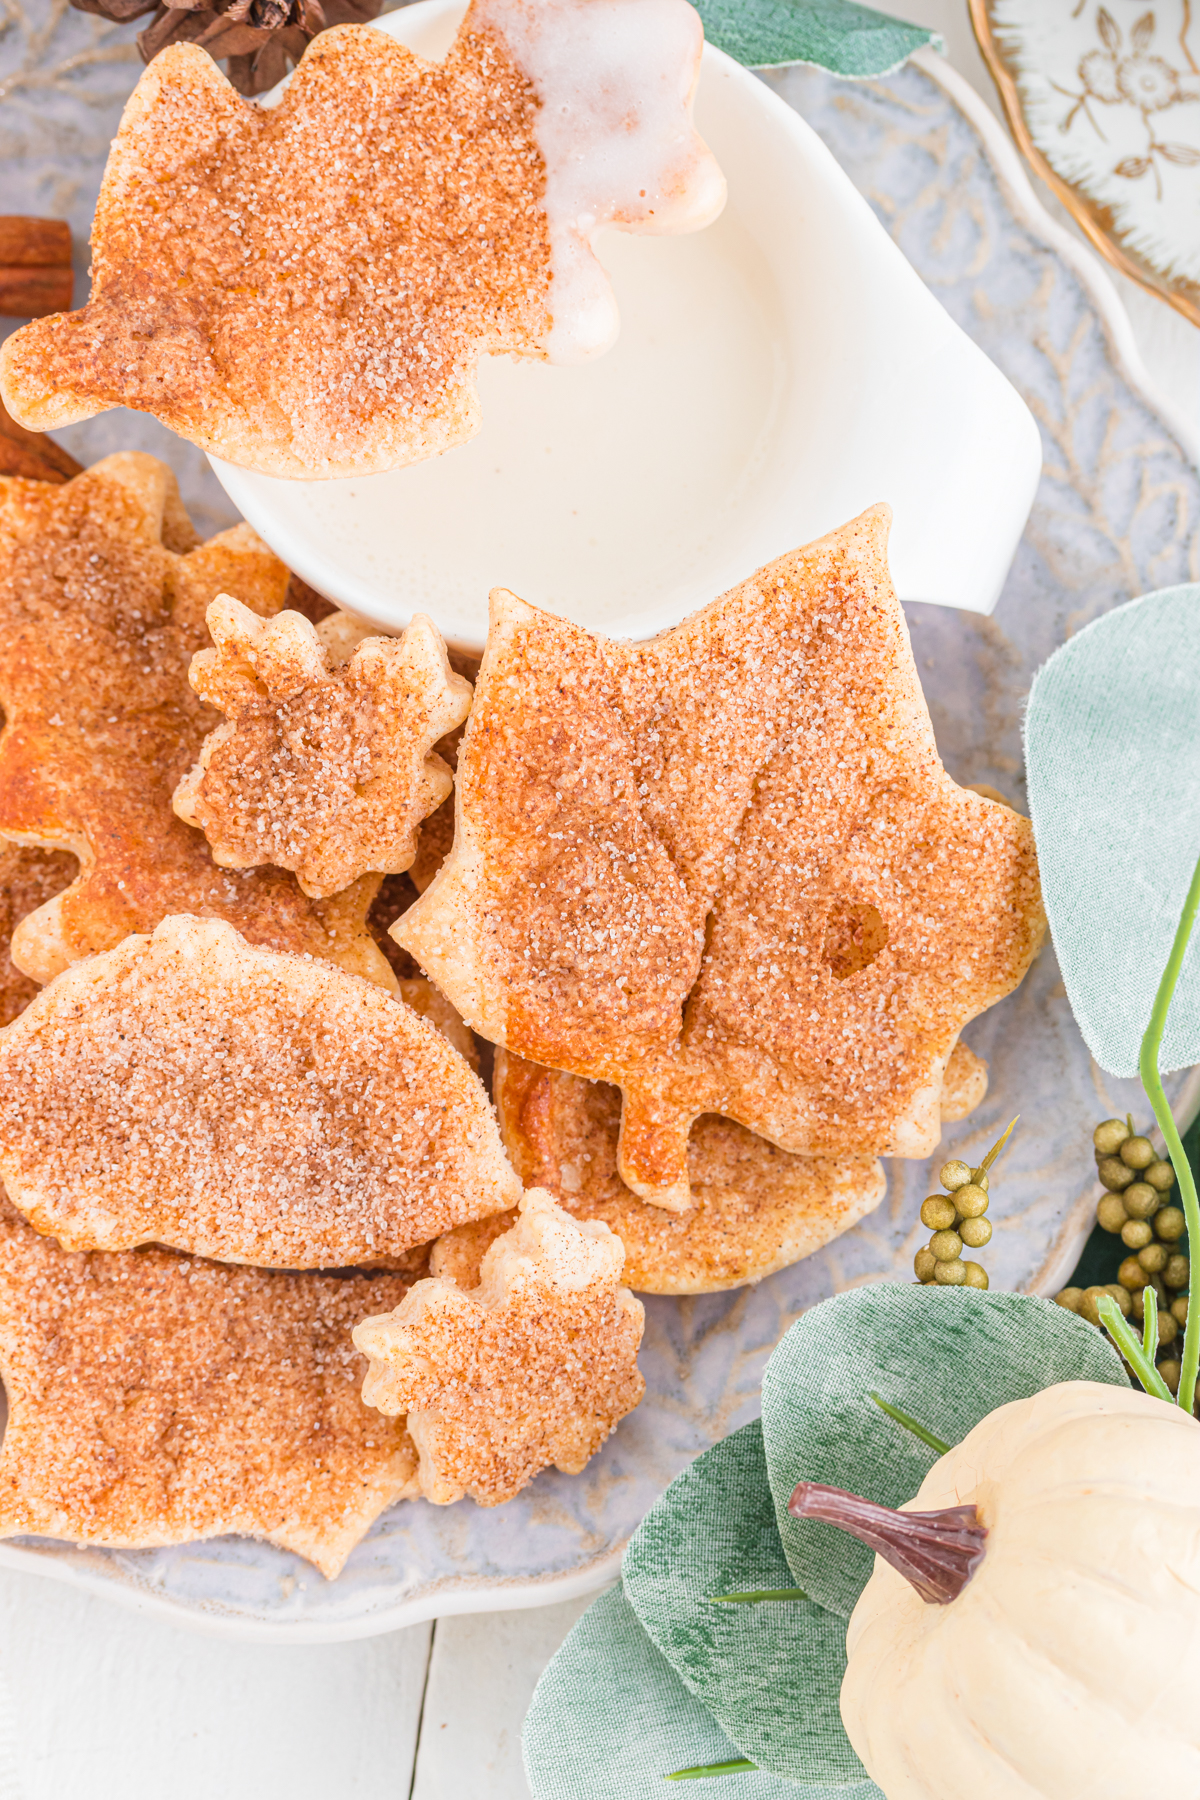 Leaf shaped cookies on a plate with dip.